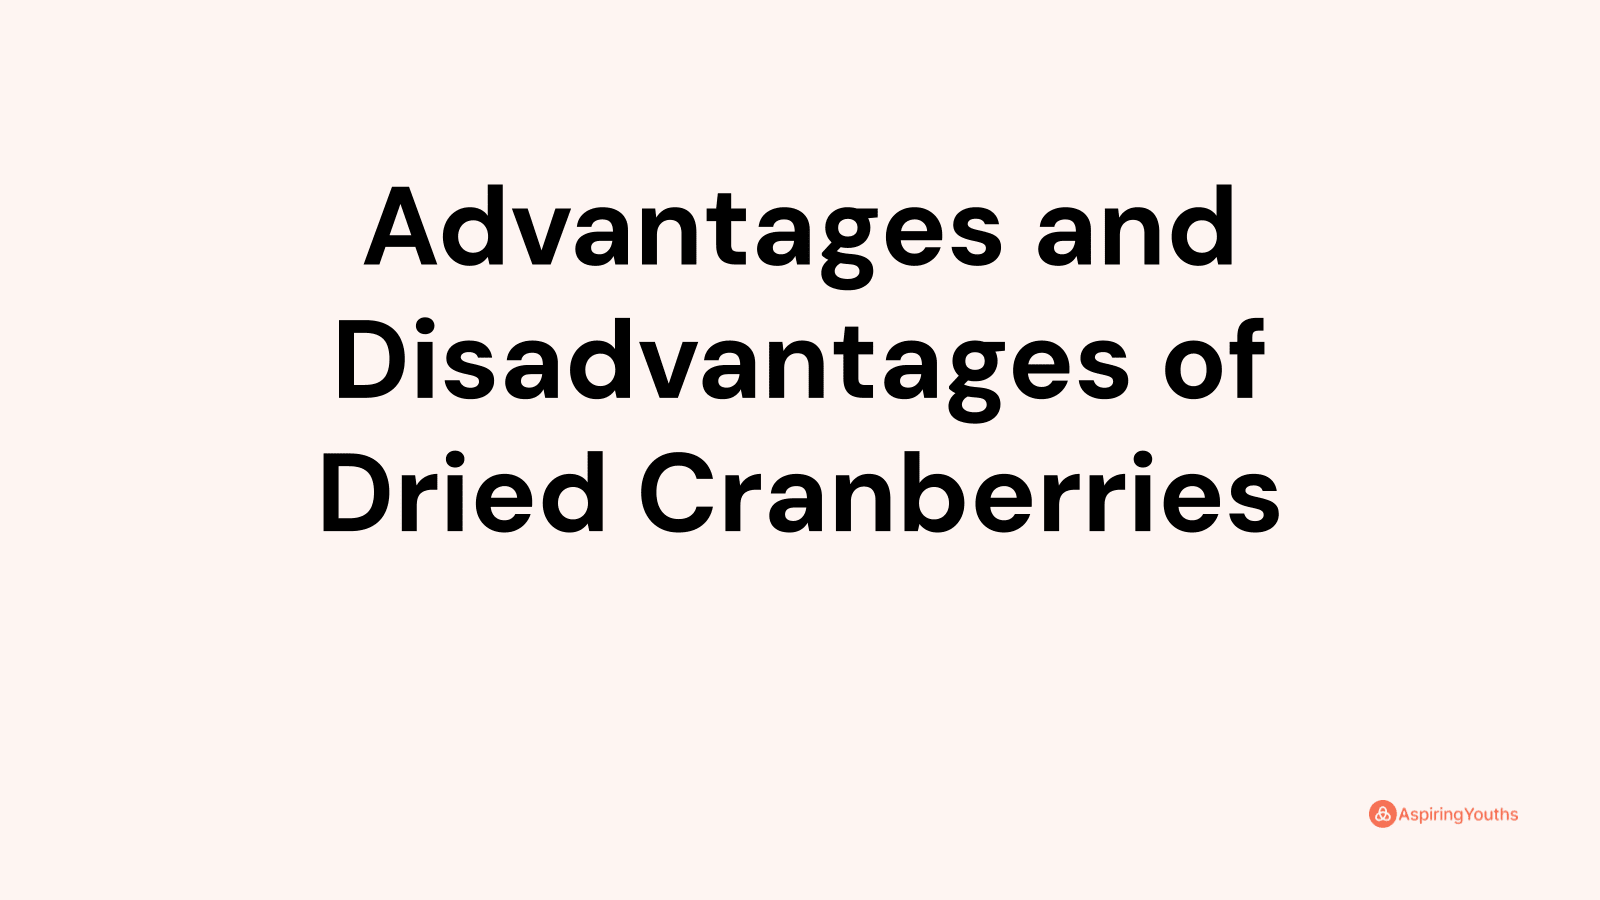 Advantages and disadvantages of Dried Cranberries